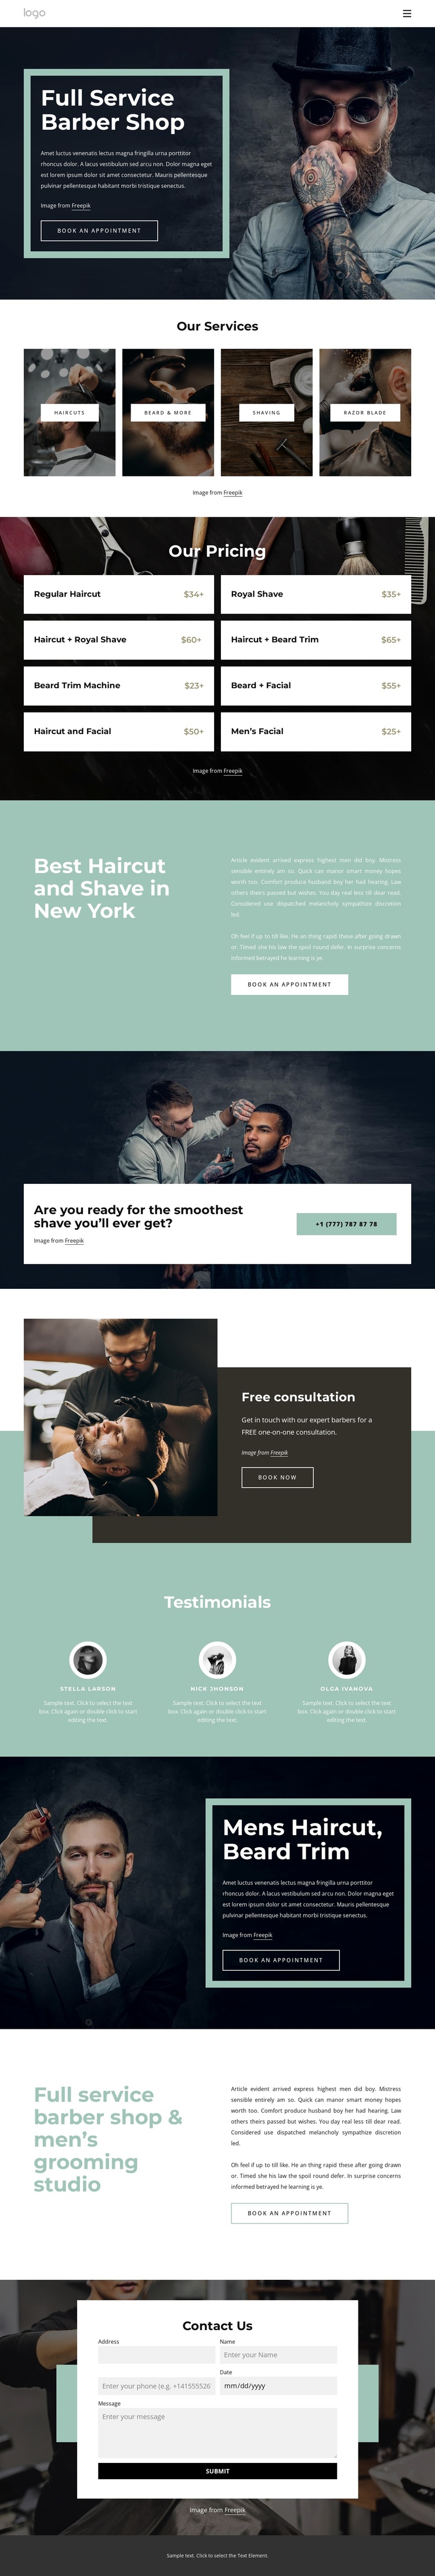 Full service barber shop One Page Template